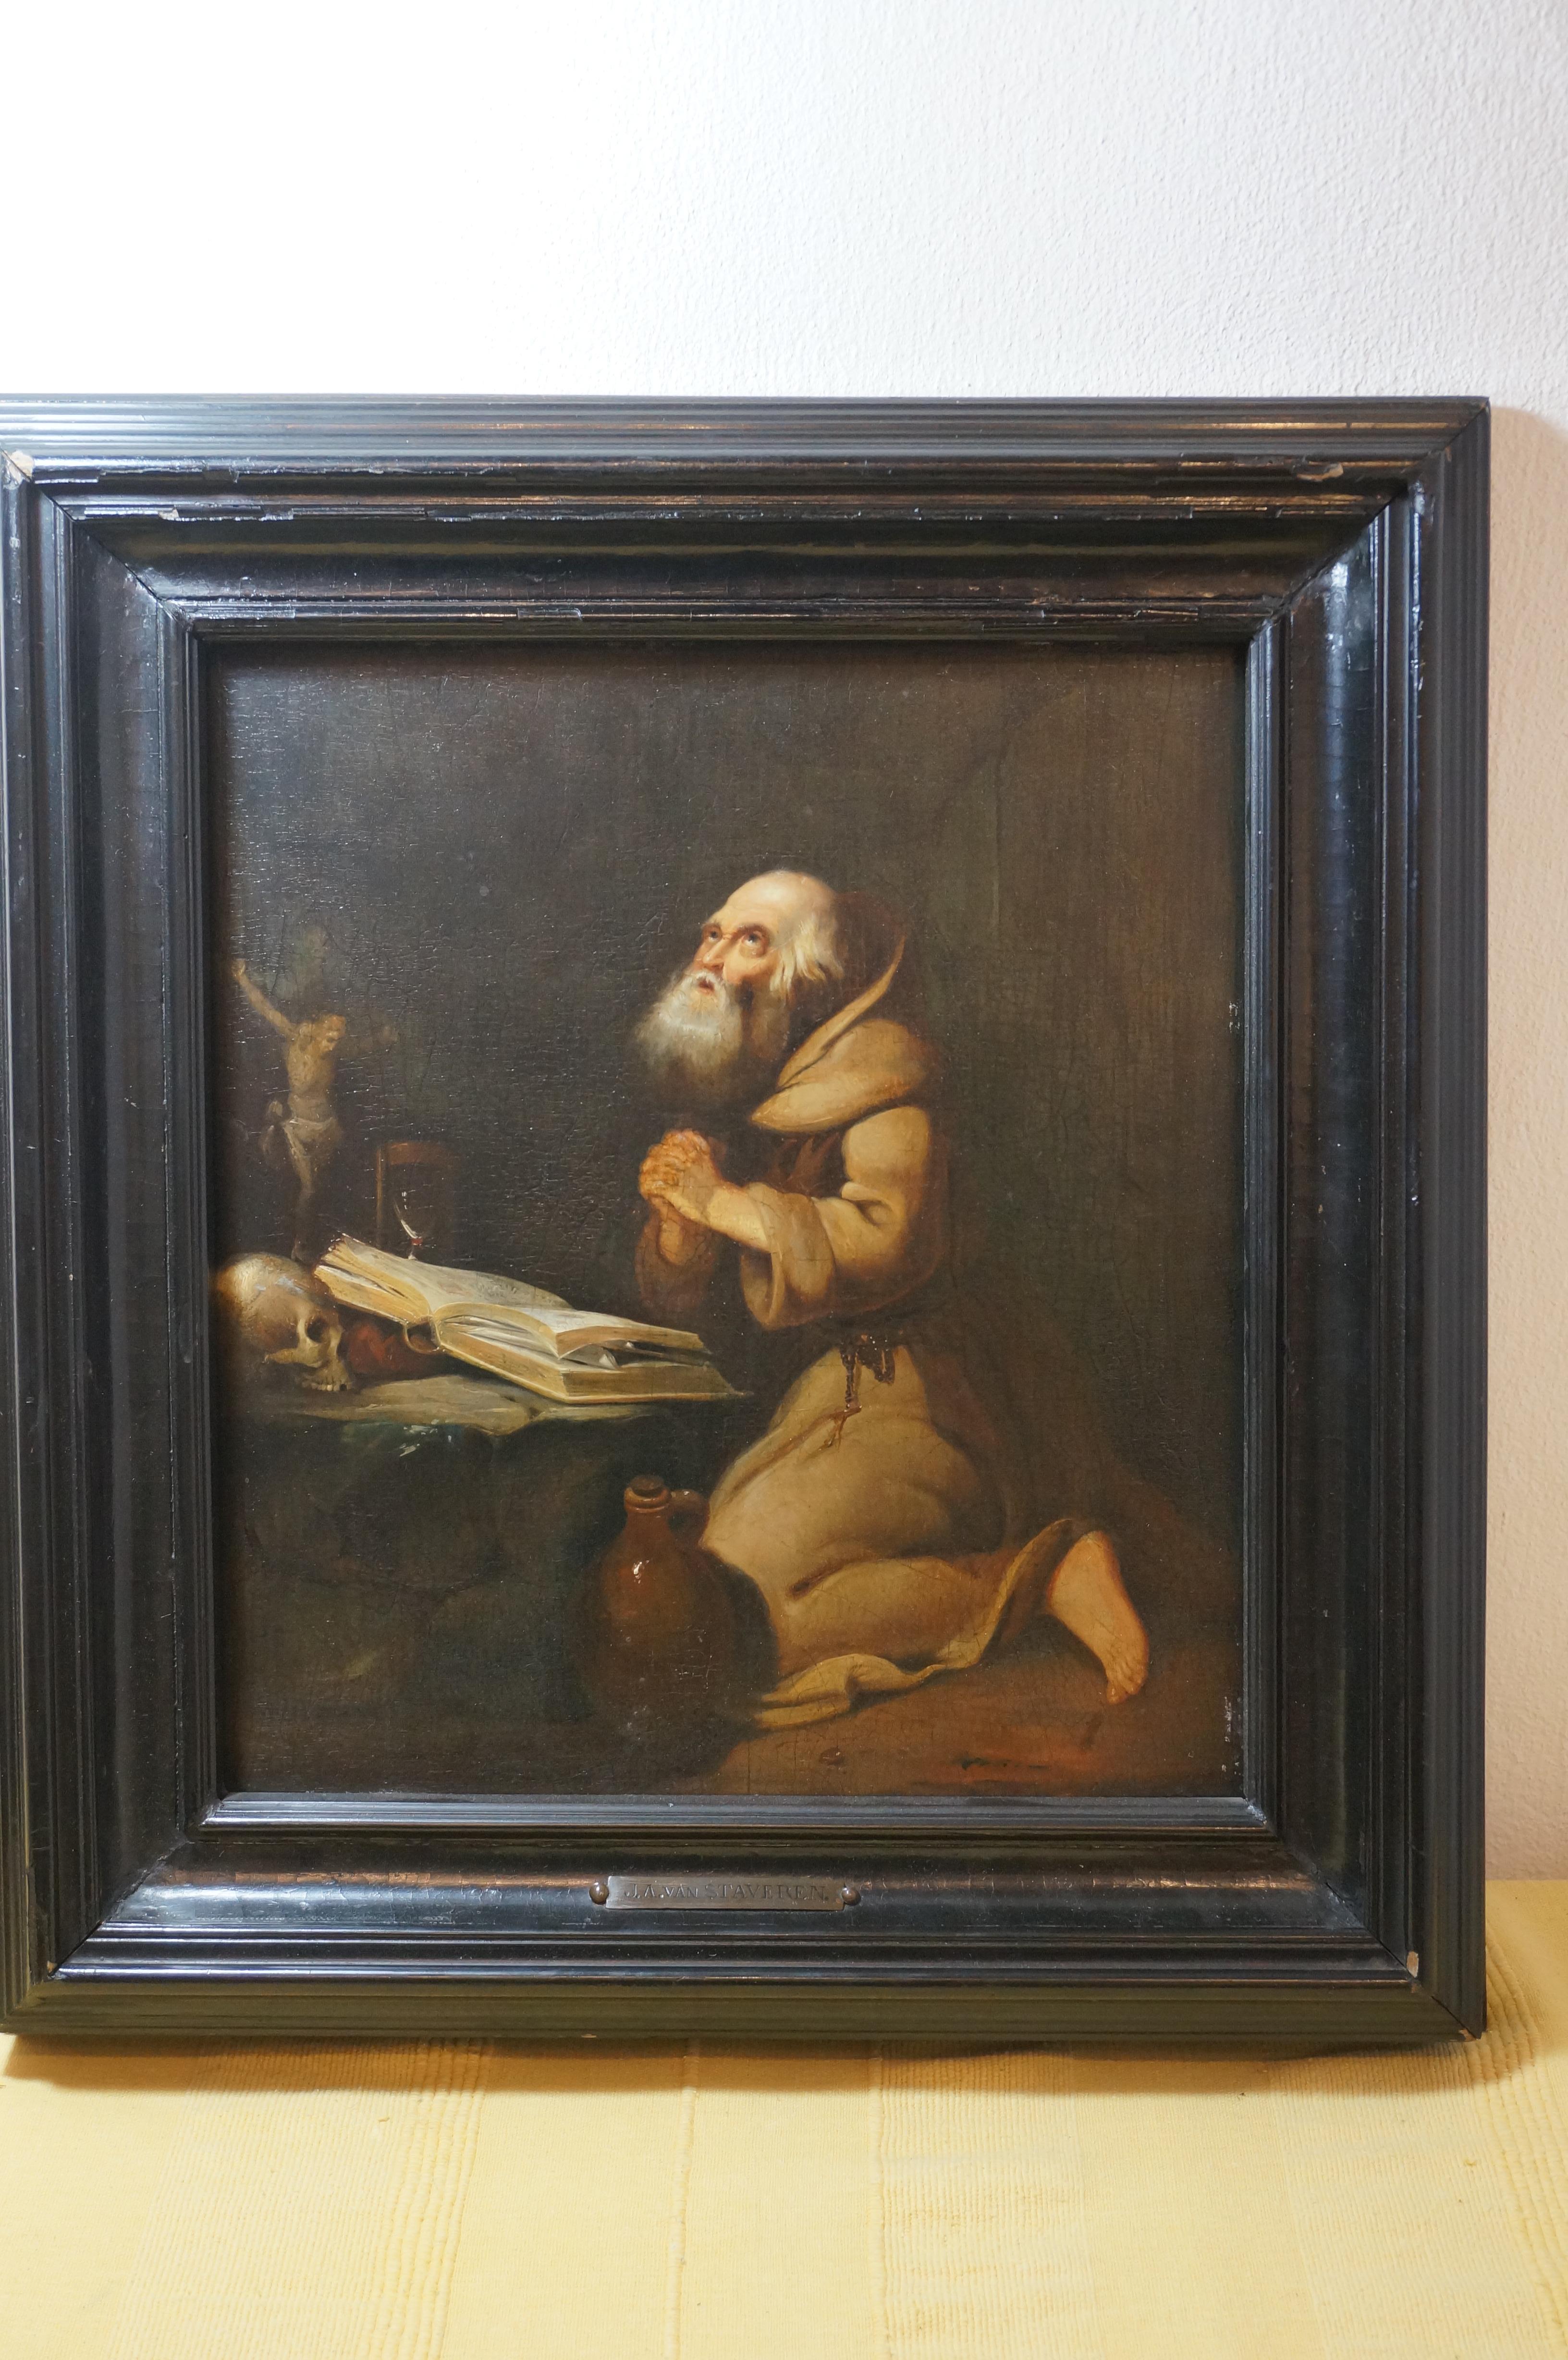 Painting of a praying hermit with book ( bible), skull (Memento Mori), Cruxifix with Corpus Christi, Rosary, Waterjug and Hourglass (Tempus Fugit = use your time well).

Oil on a bevelled oak panel. Follower of the 'Leiden painters'.

Black frame of